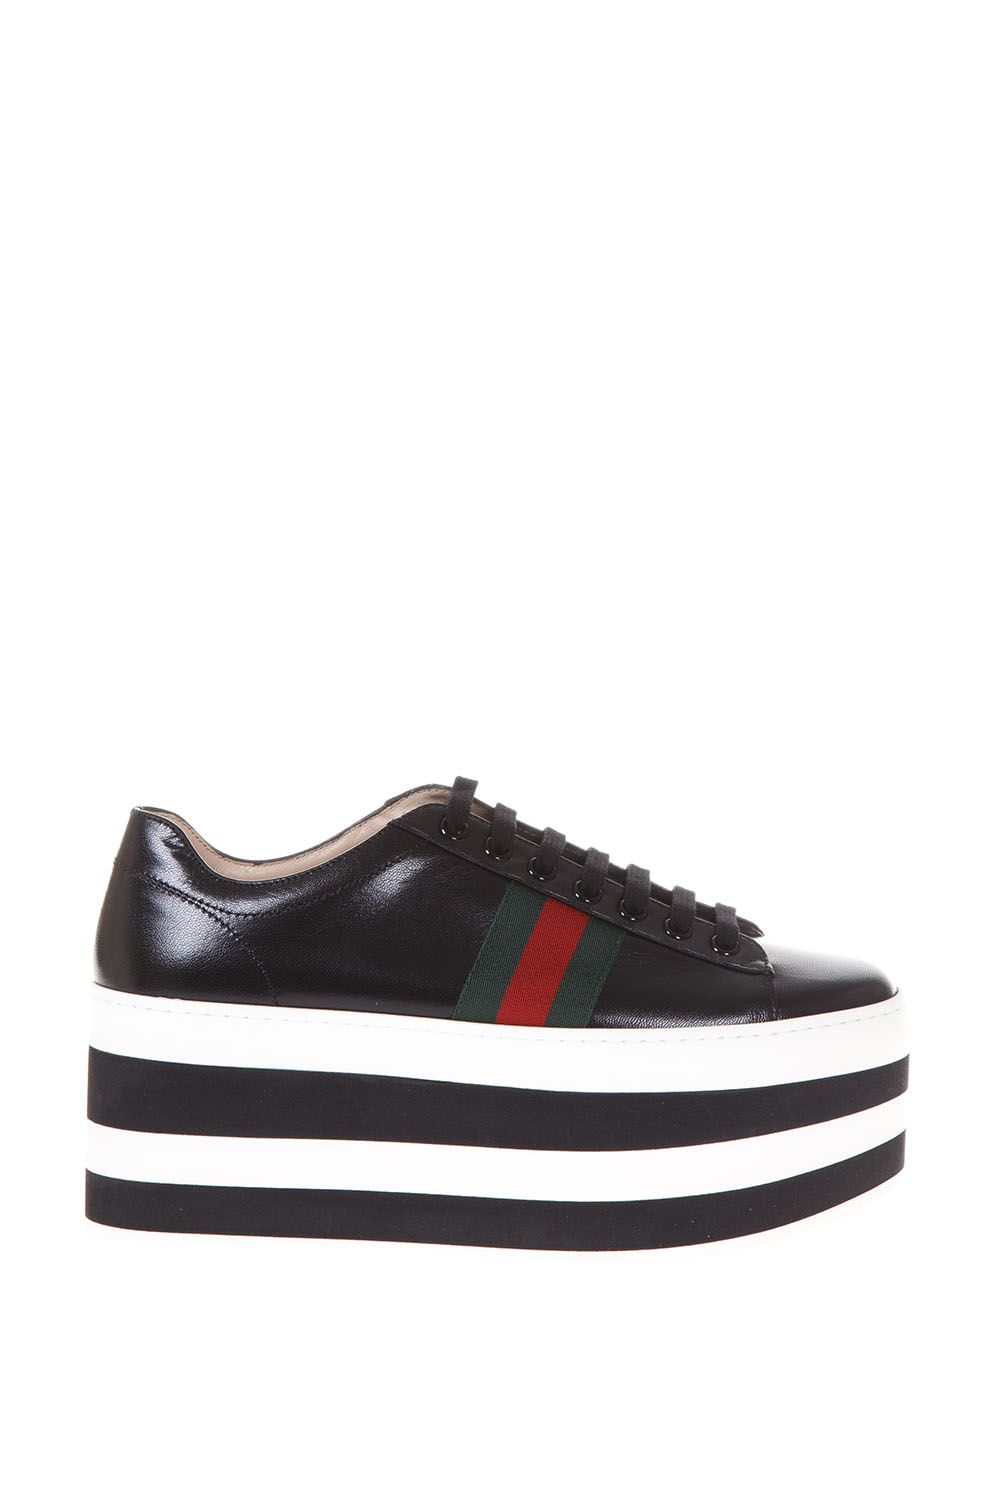 GUCCI Peggy Leather Platform Low-Top Sneaker in Black | ModeSens